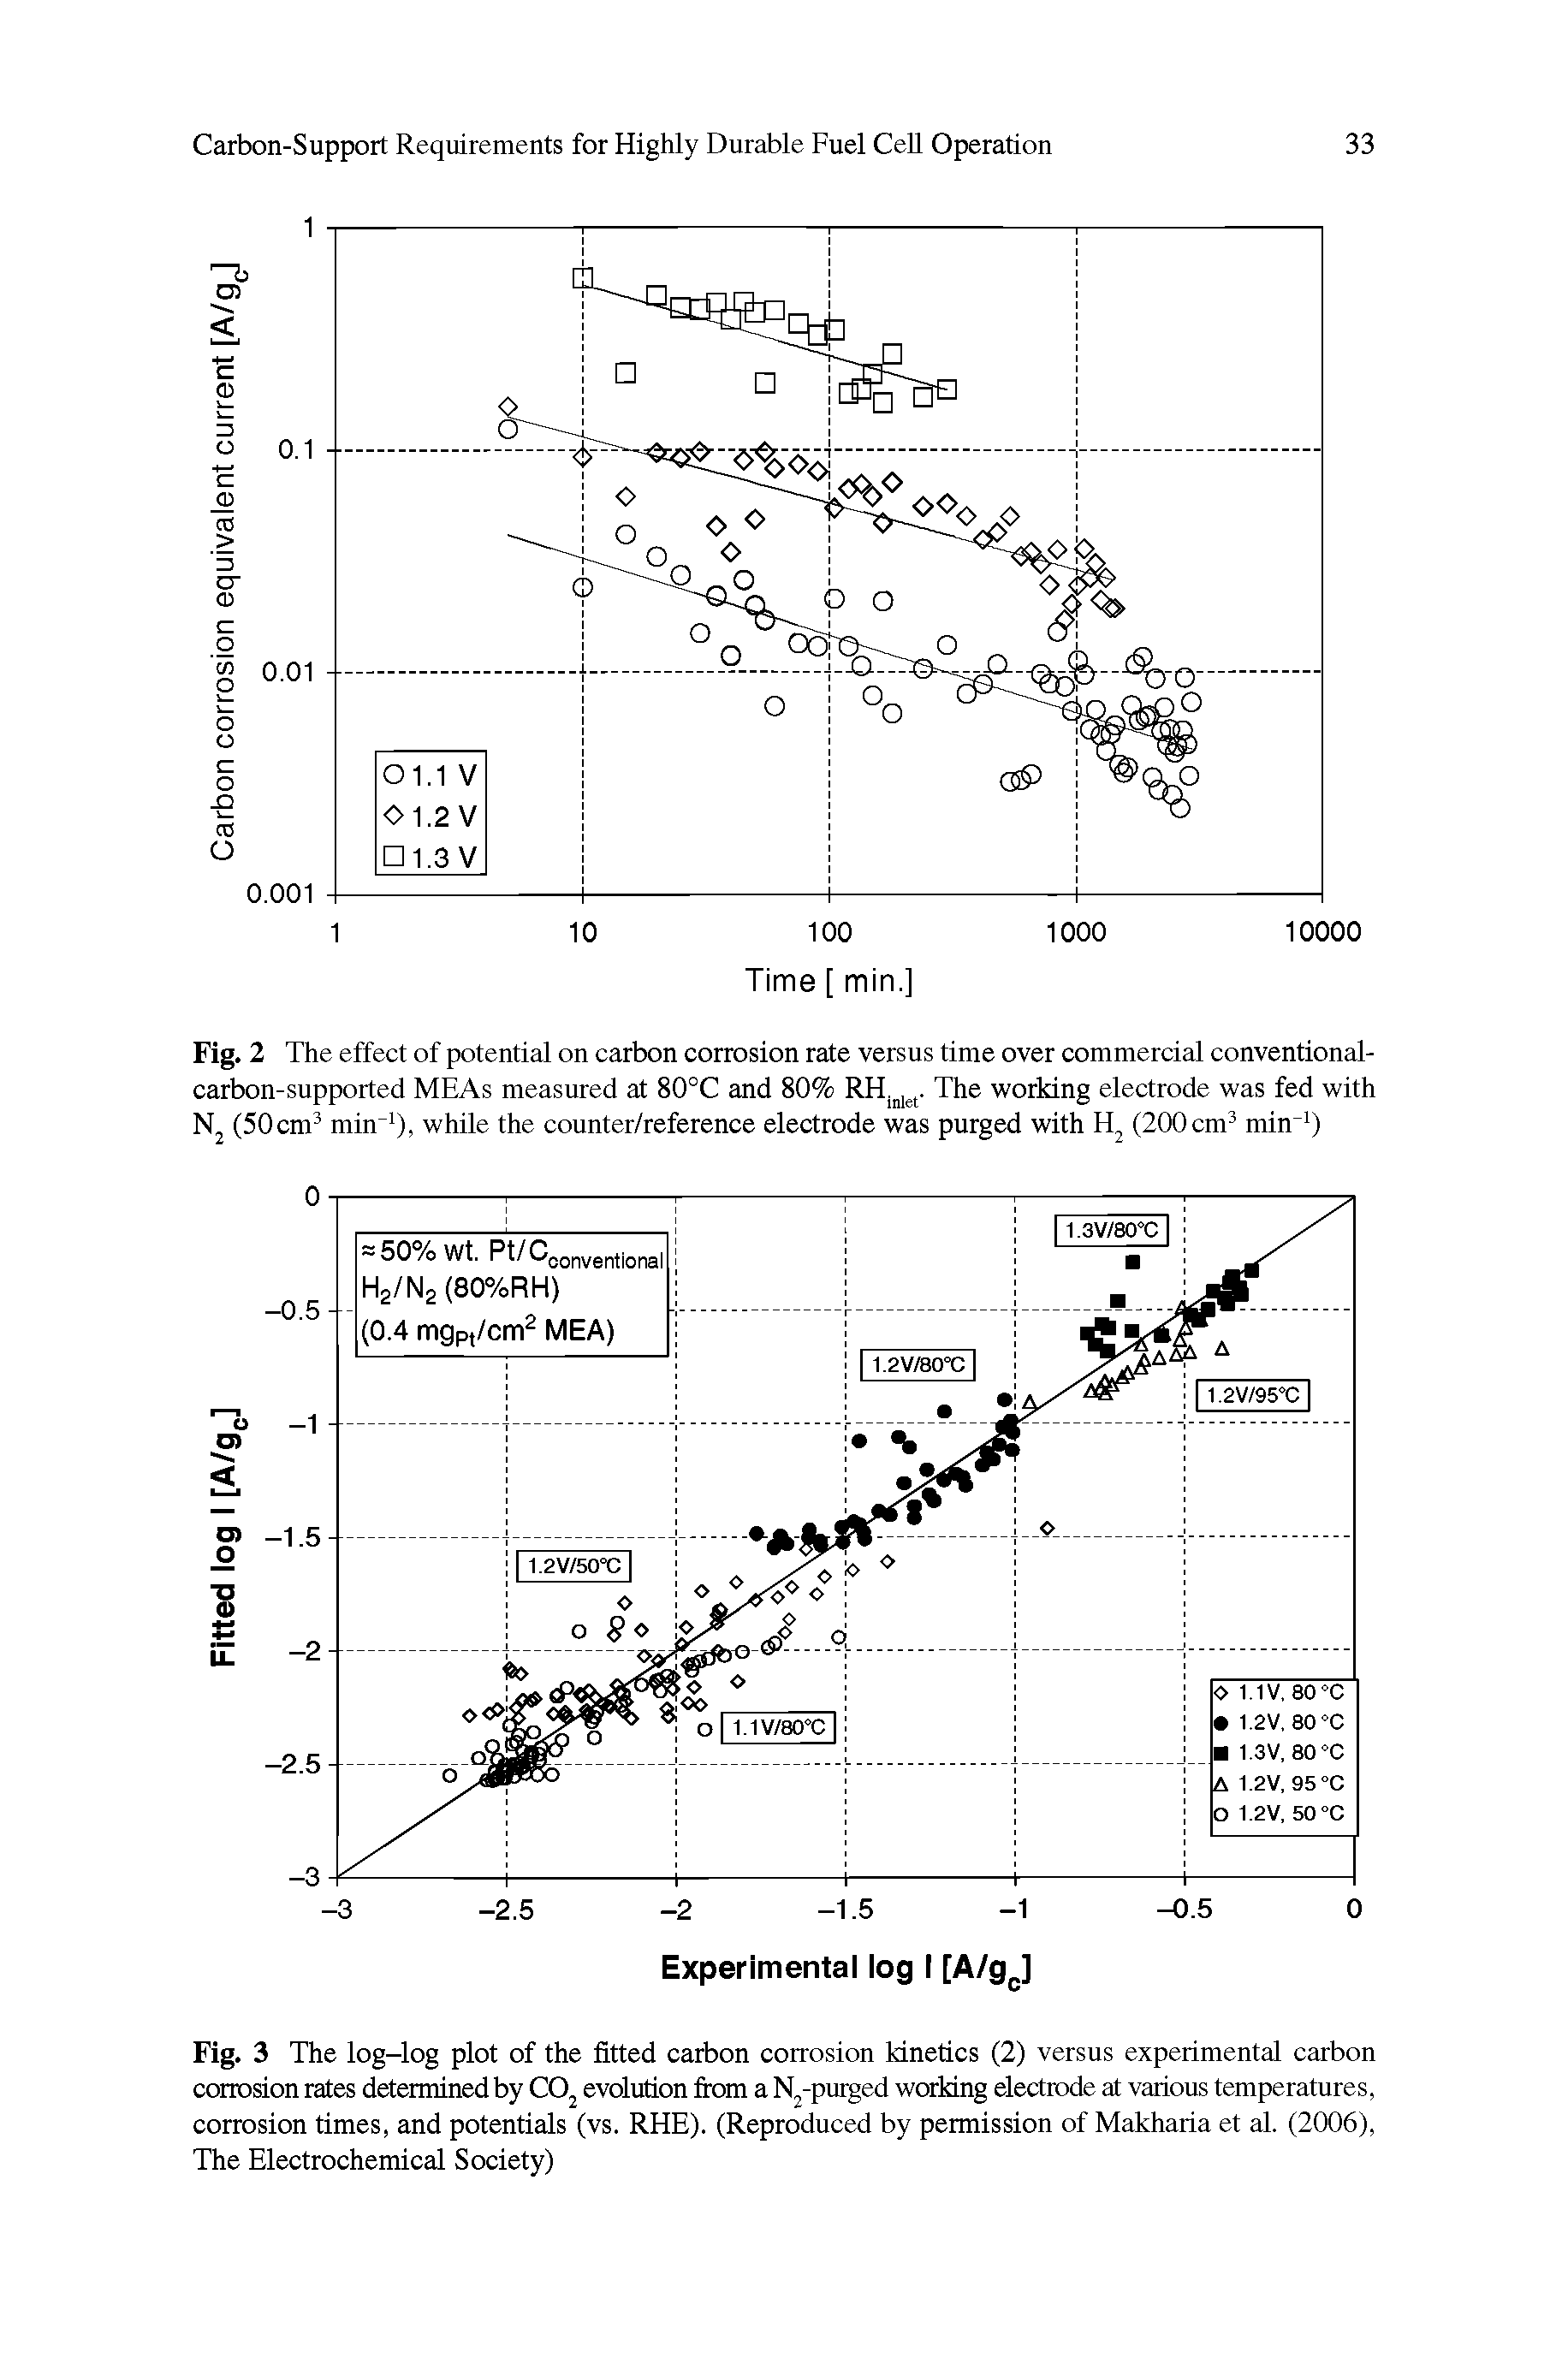 Fig. 3 The log-log plot of the fitted carbon corrosion kinetics (2) versus experimental carbon corrosion rates determined by CO evolution from a N -purged working electrode at various temperatures, corrosion times, and potentials (vs. RHE). (Reproduced by permission of Makharia et al. (2006), The Electrochemical Society)...